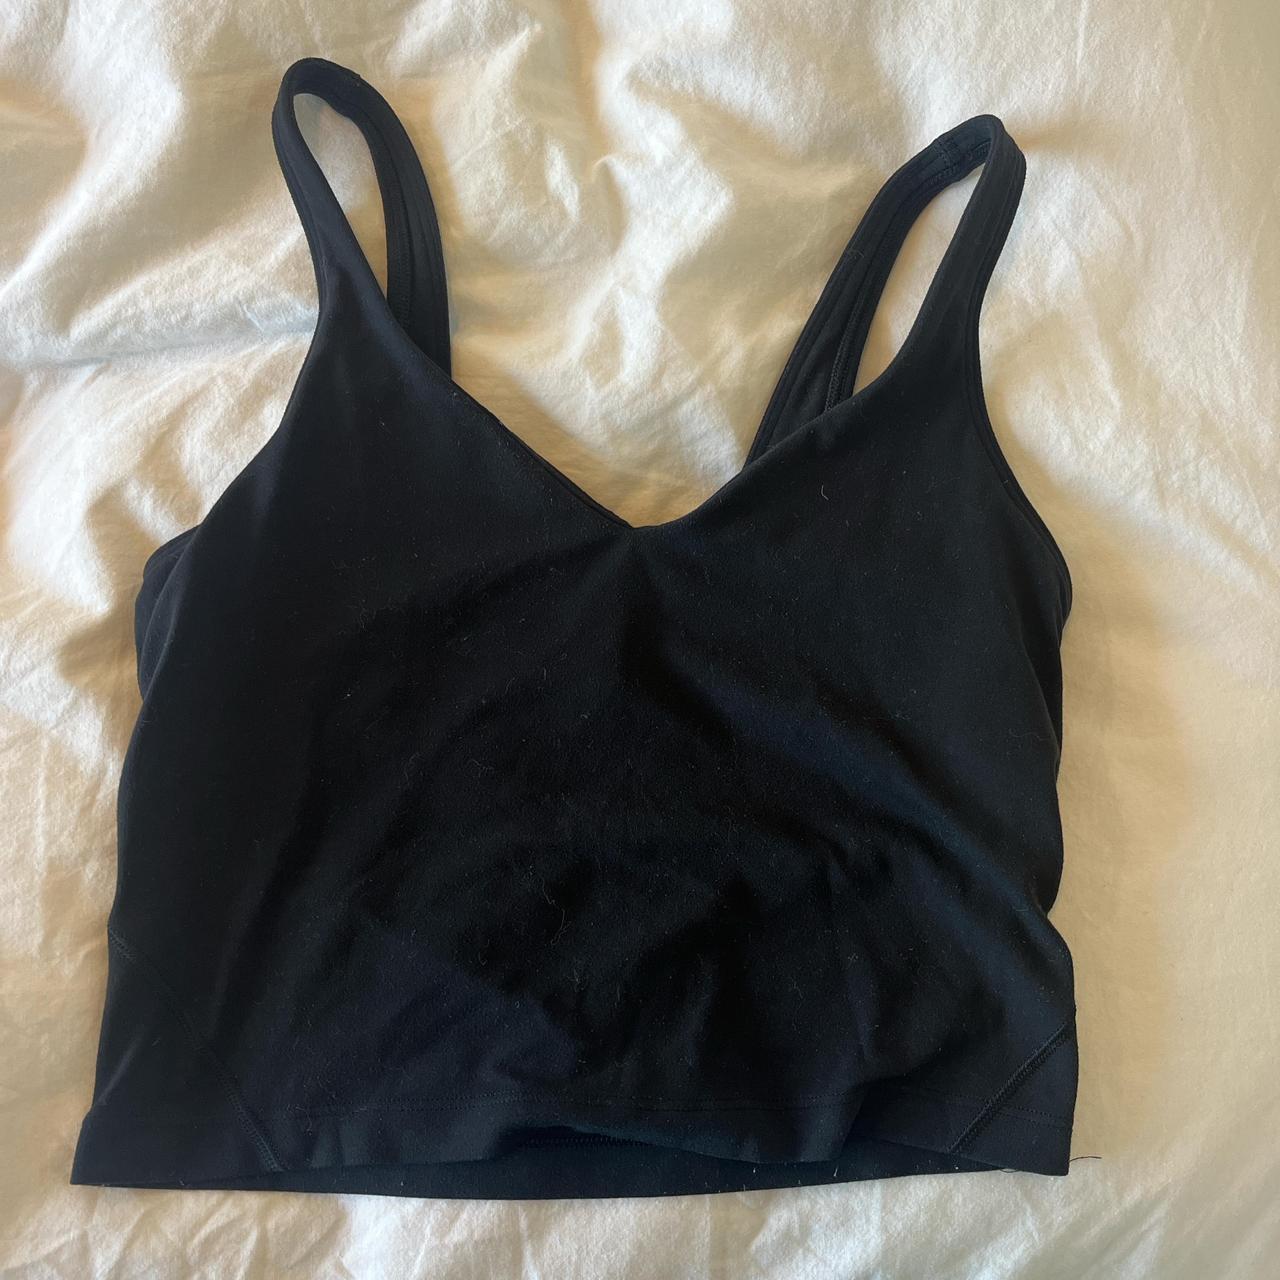 Sz 8 water drop align tank! Worn once and took out - Depop